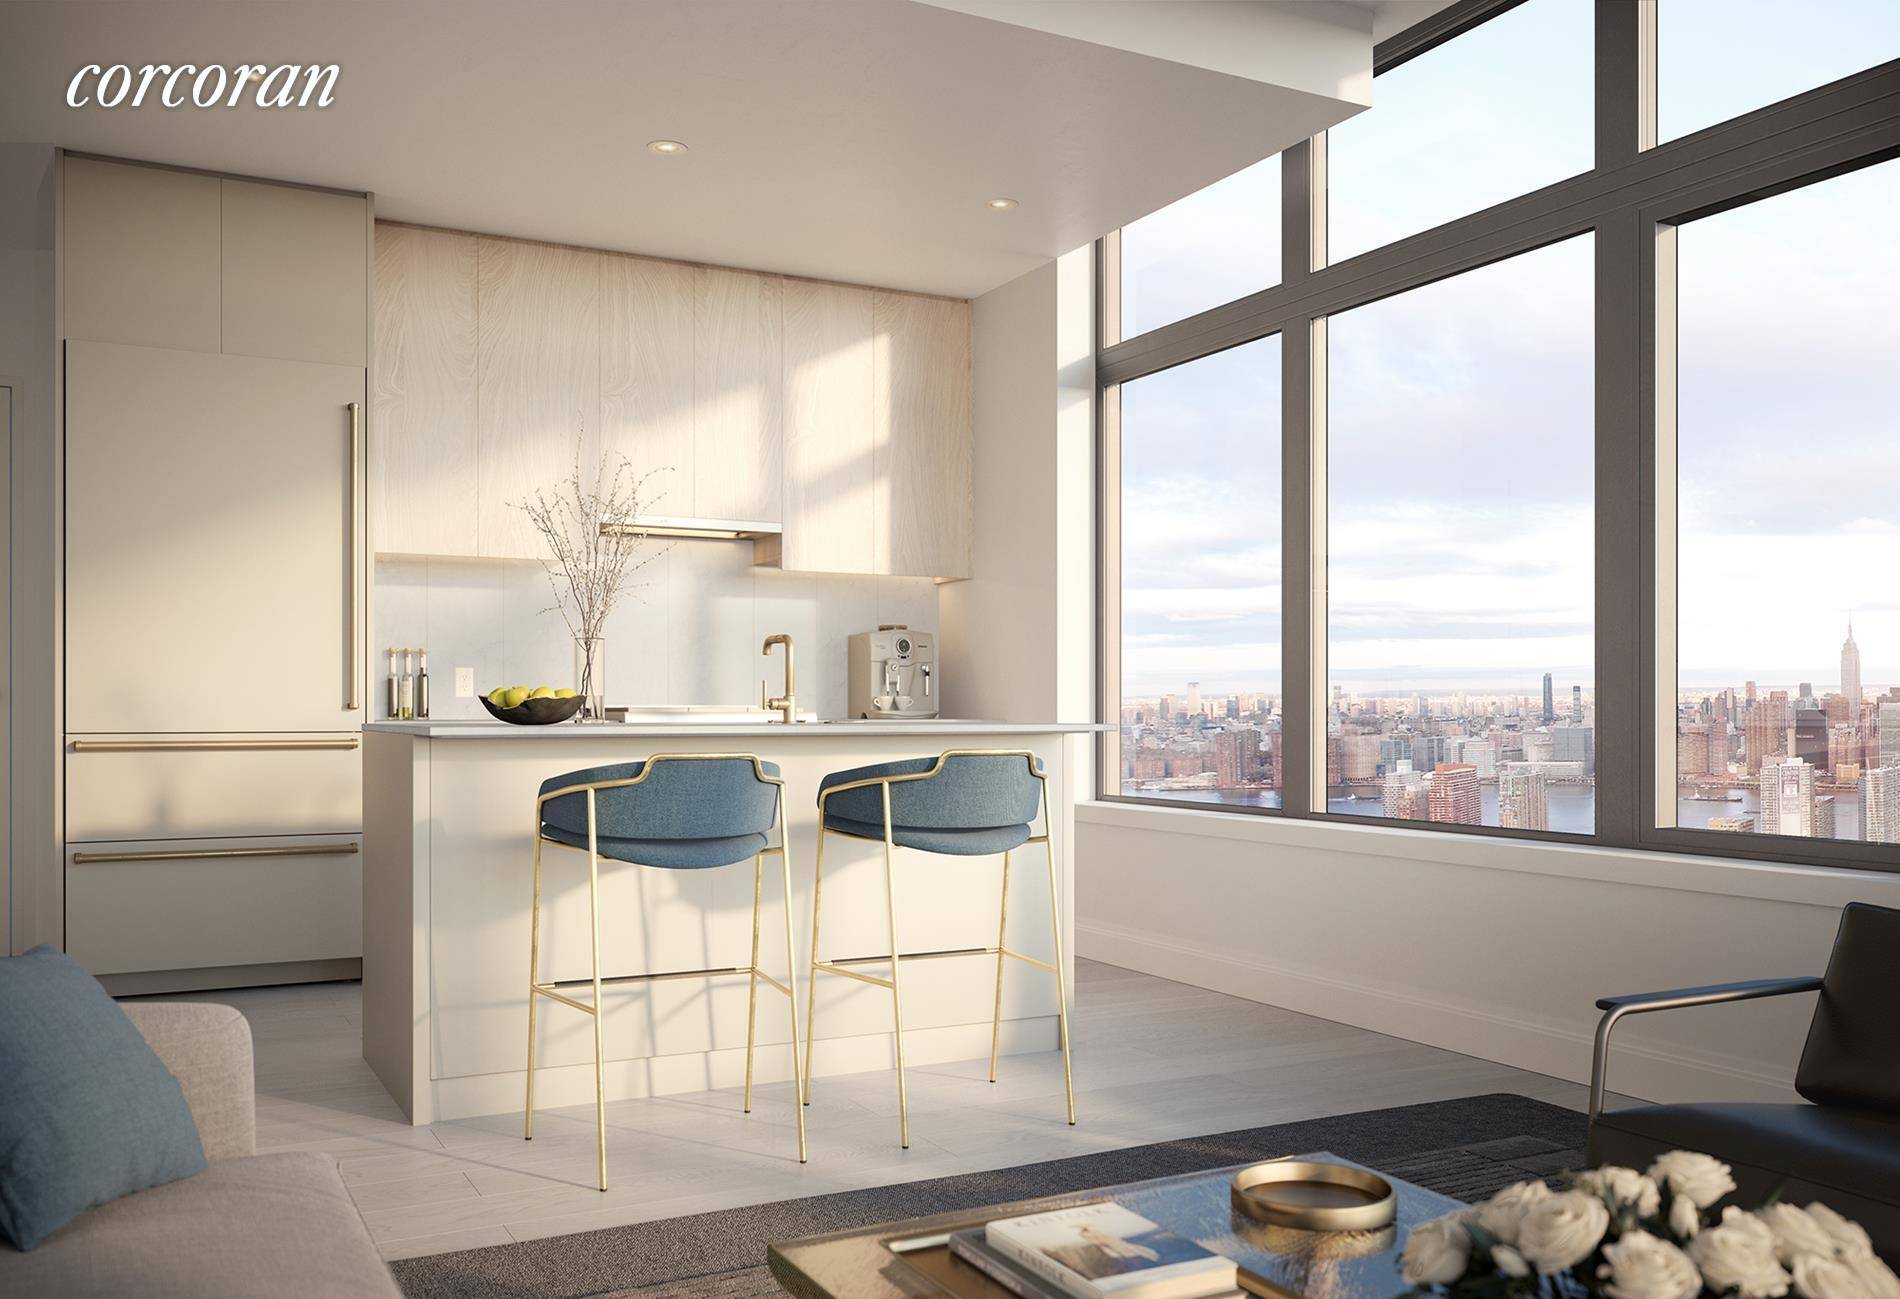 SPECTACULAR NEW CONSTRUCTION TWO BEDROOM TWO BATHWelcome to SKYLINE TOWER Long Island City The Most Luxurious Condominium in Queens Whether you're looking to relax, socialize, entertain or take a dip ...